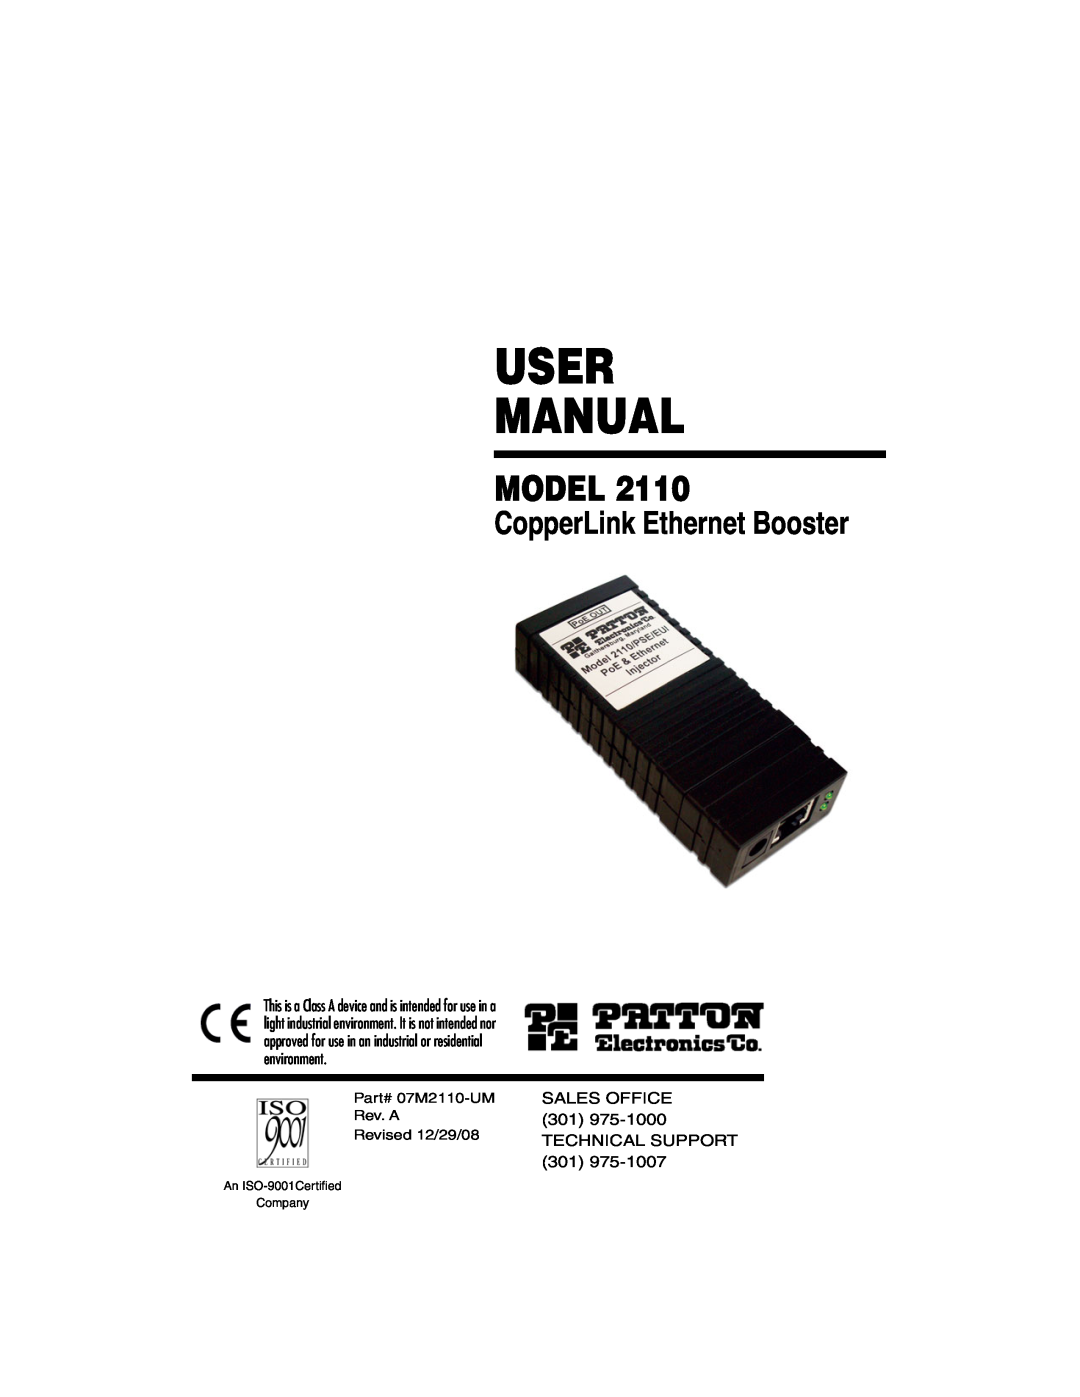 Patton electronic 2110 user manual Model, CopperLink Ethernet Booster, An ISO-9001Certiﬁed Company 